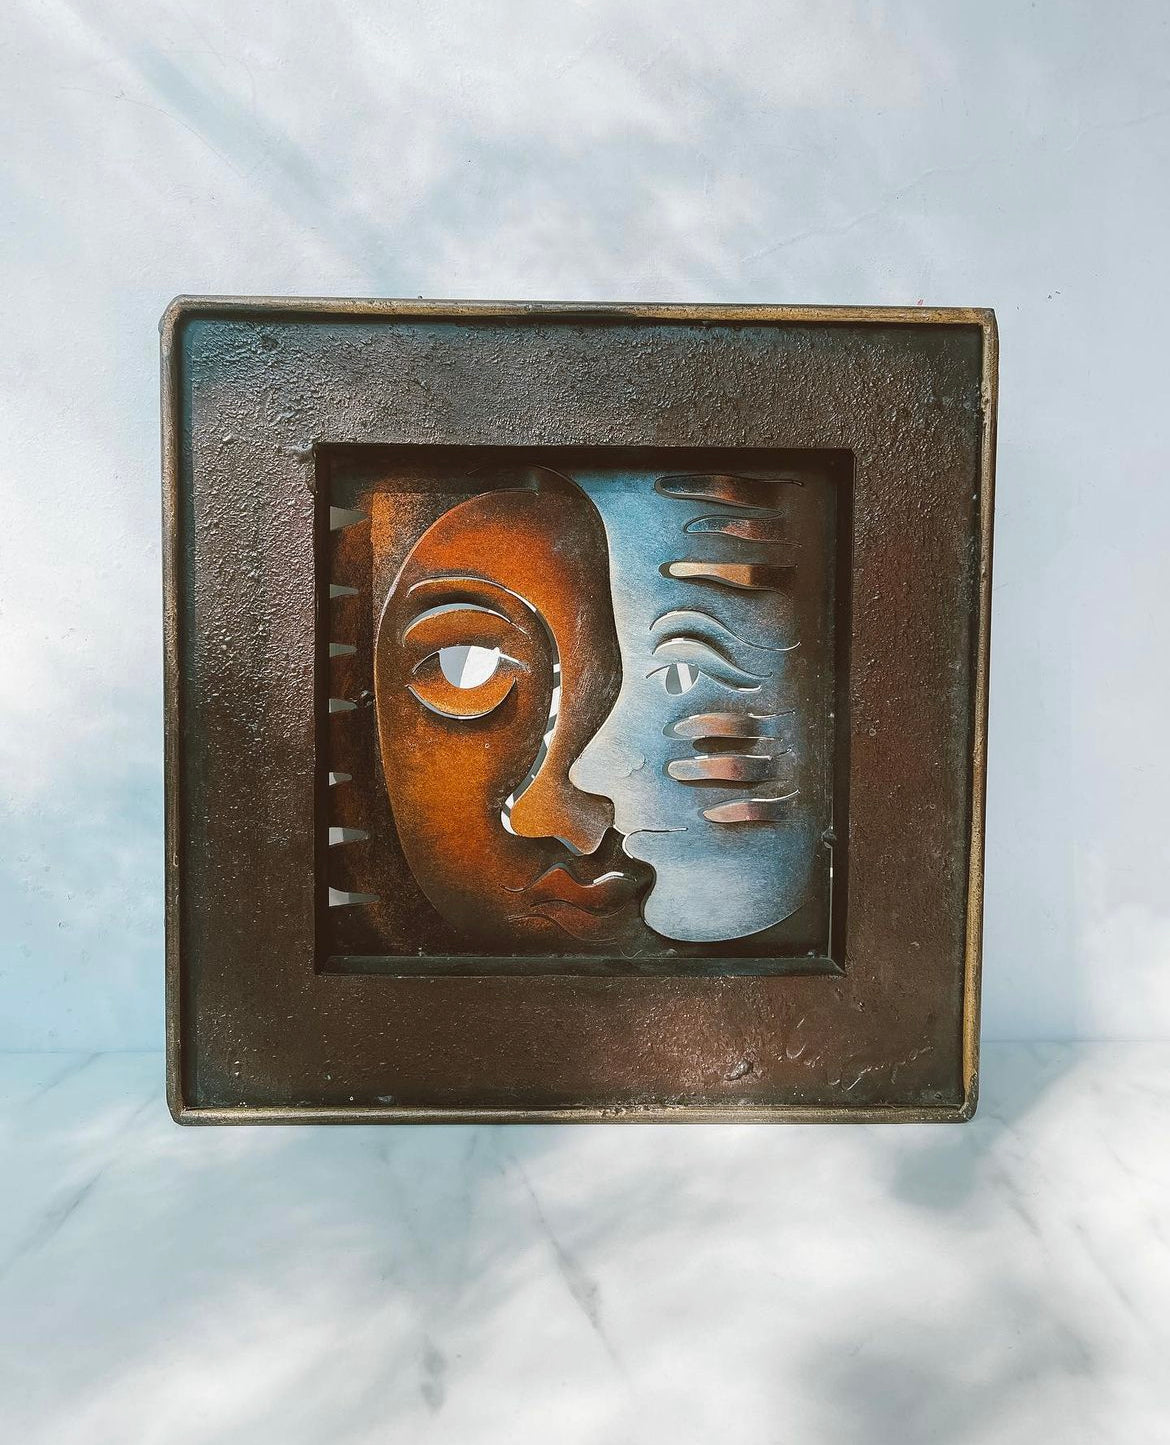 Fire and Ice Dual Face Sculpted Metal Art Signed Andres Martin De Campo